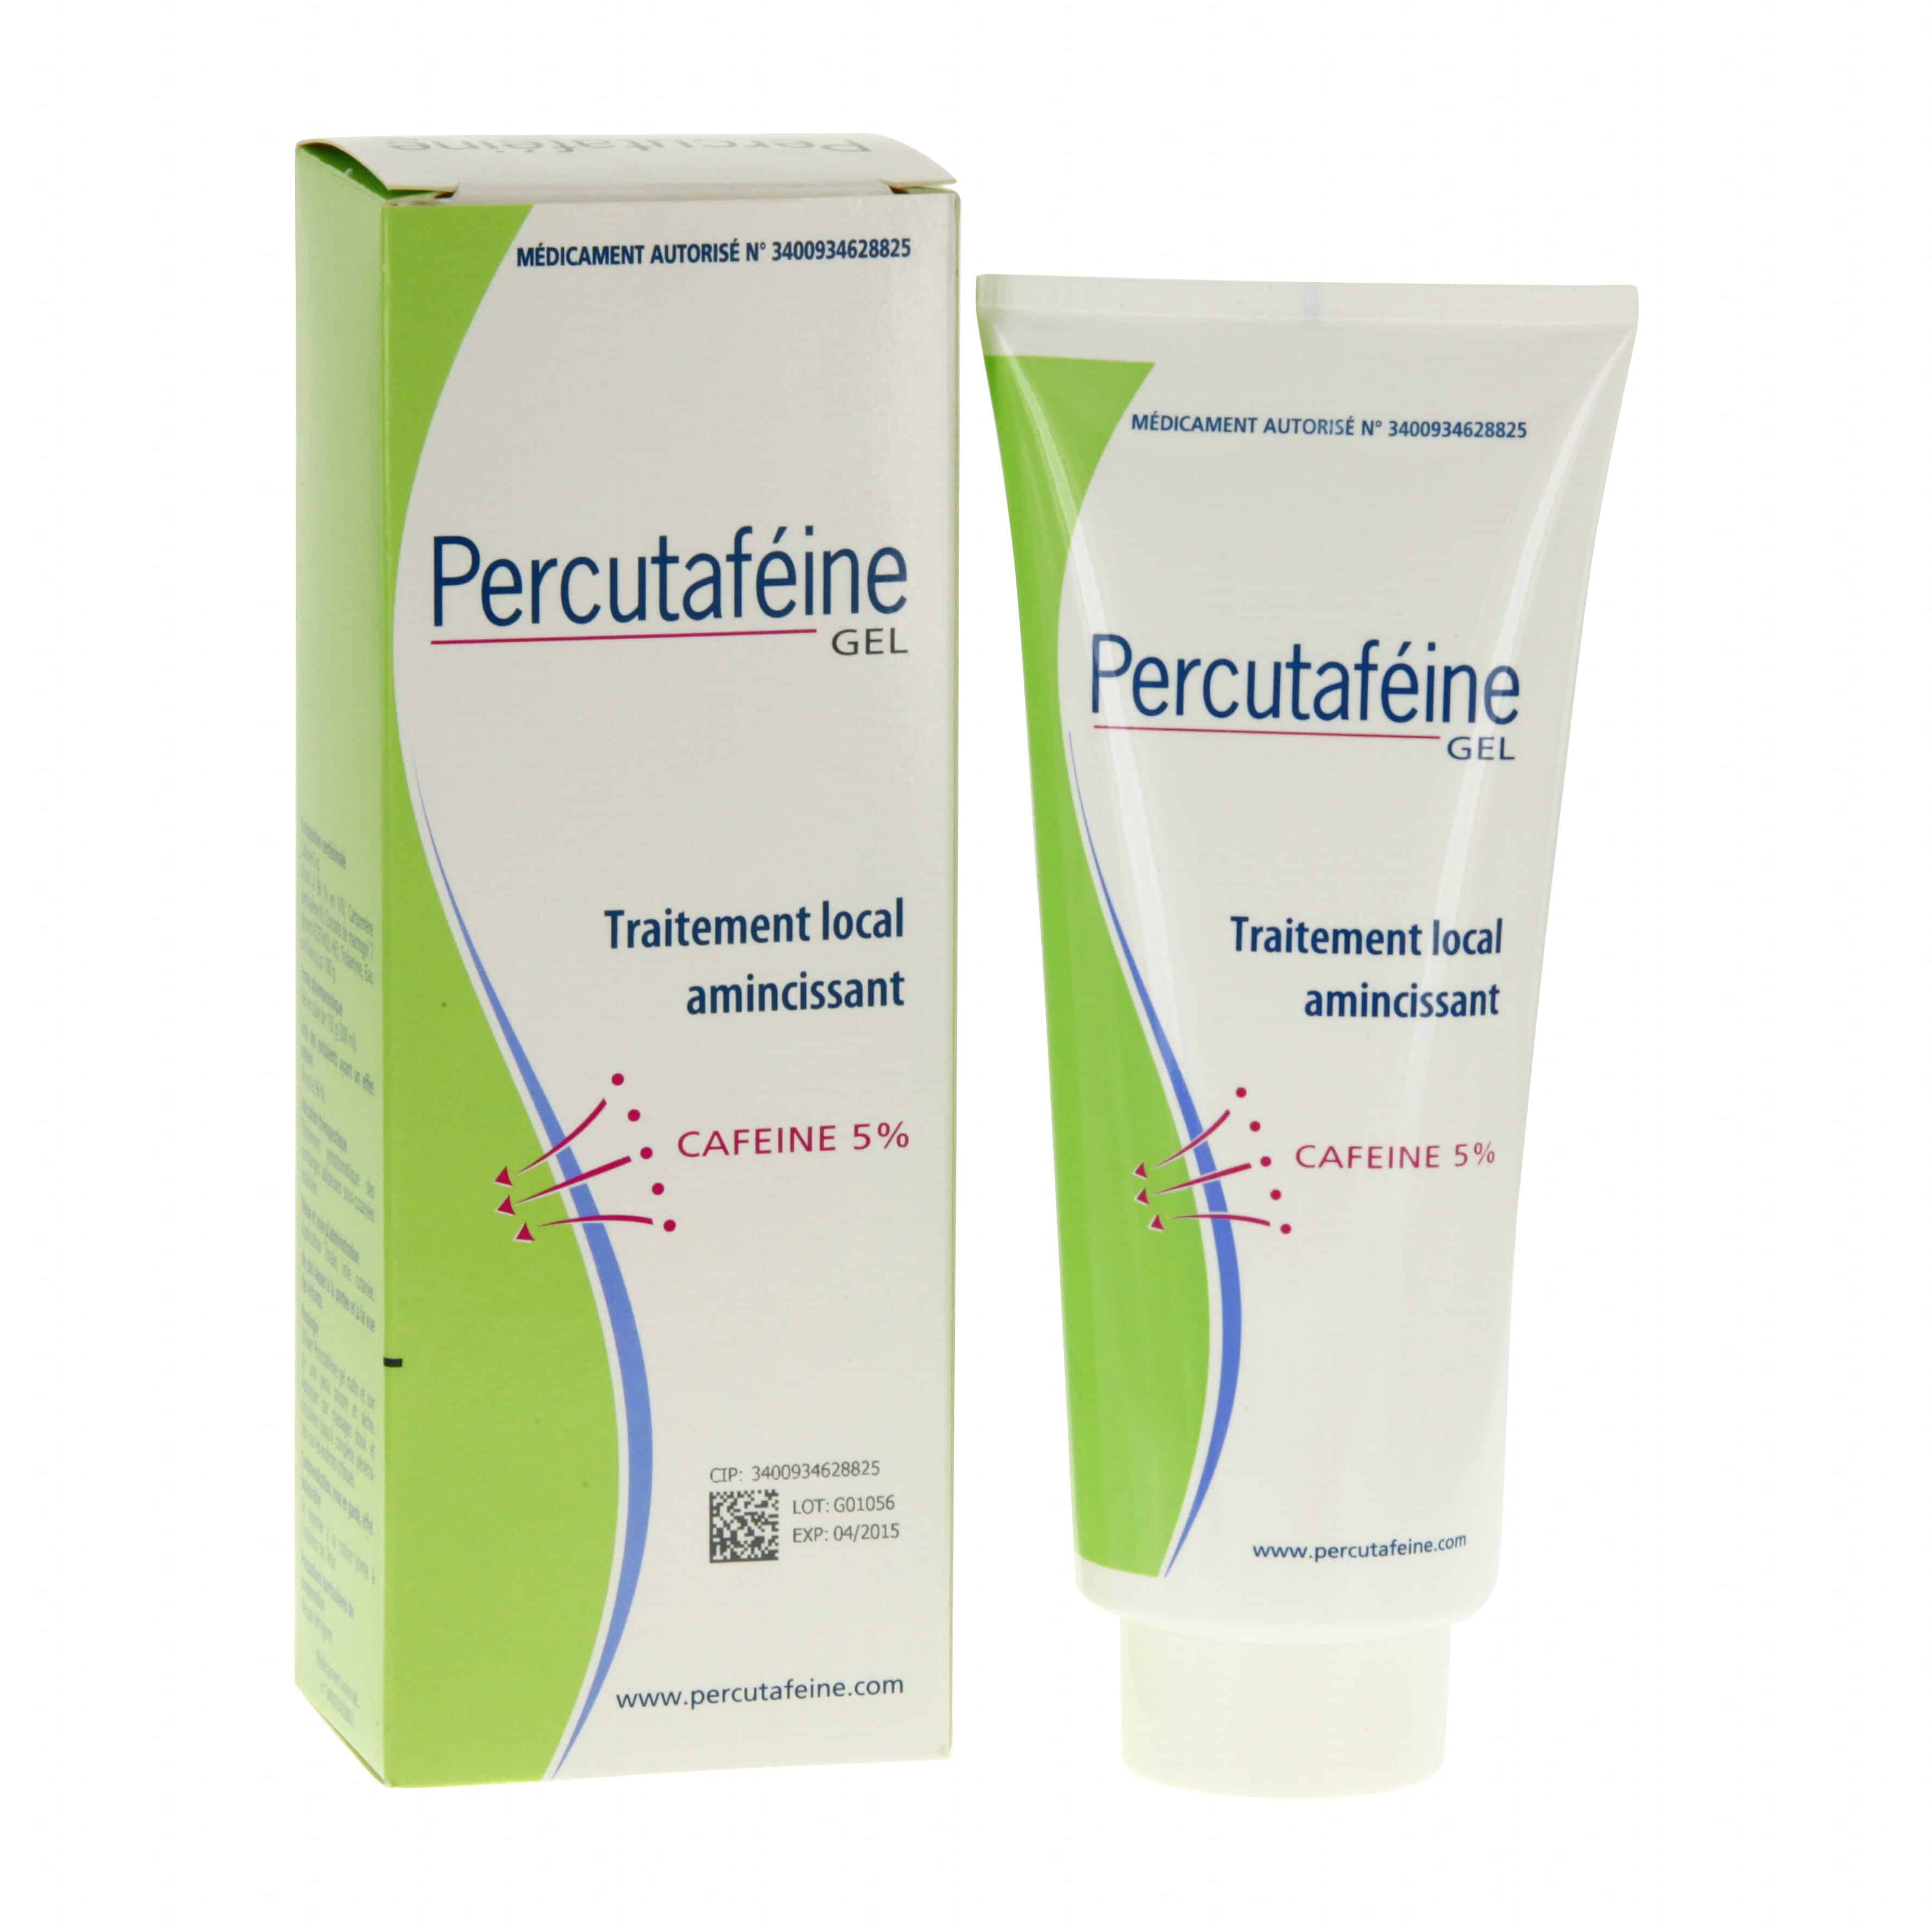 Percutafeine: the miracle cellulite treatment? &#8211; Happiness and health